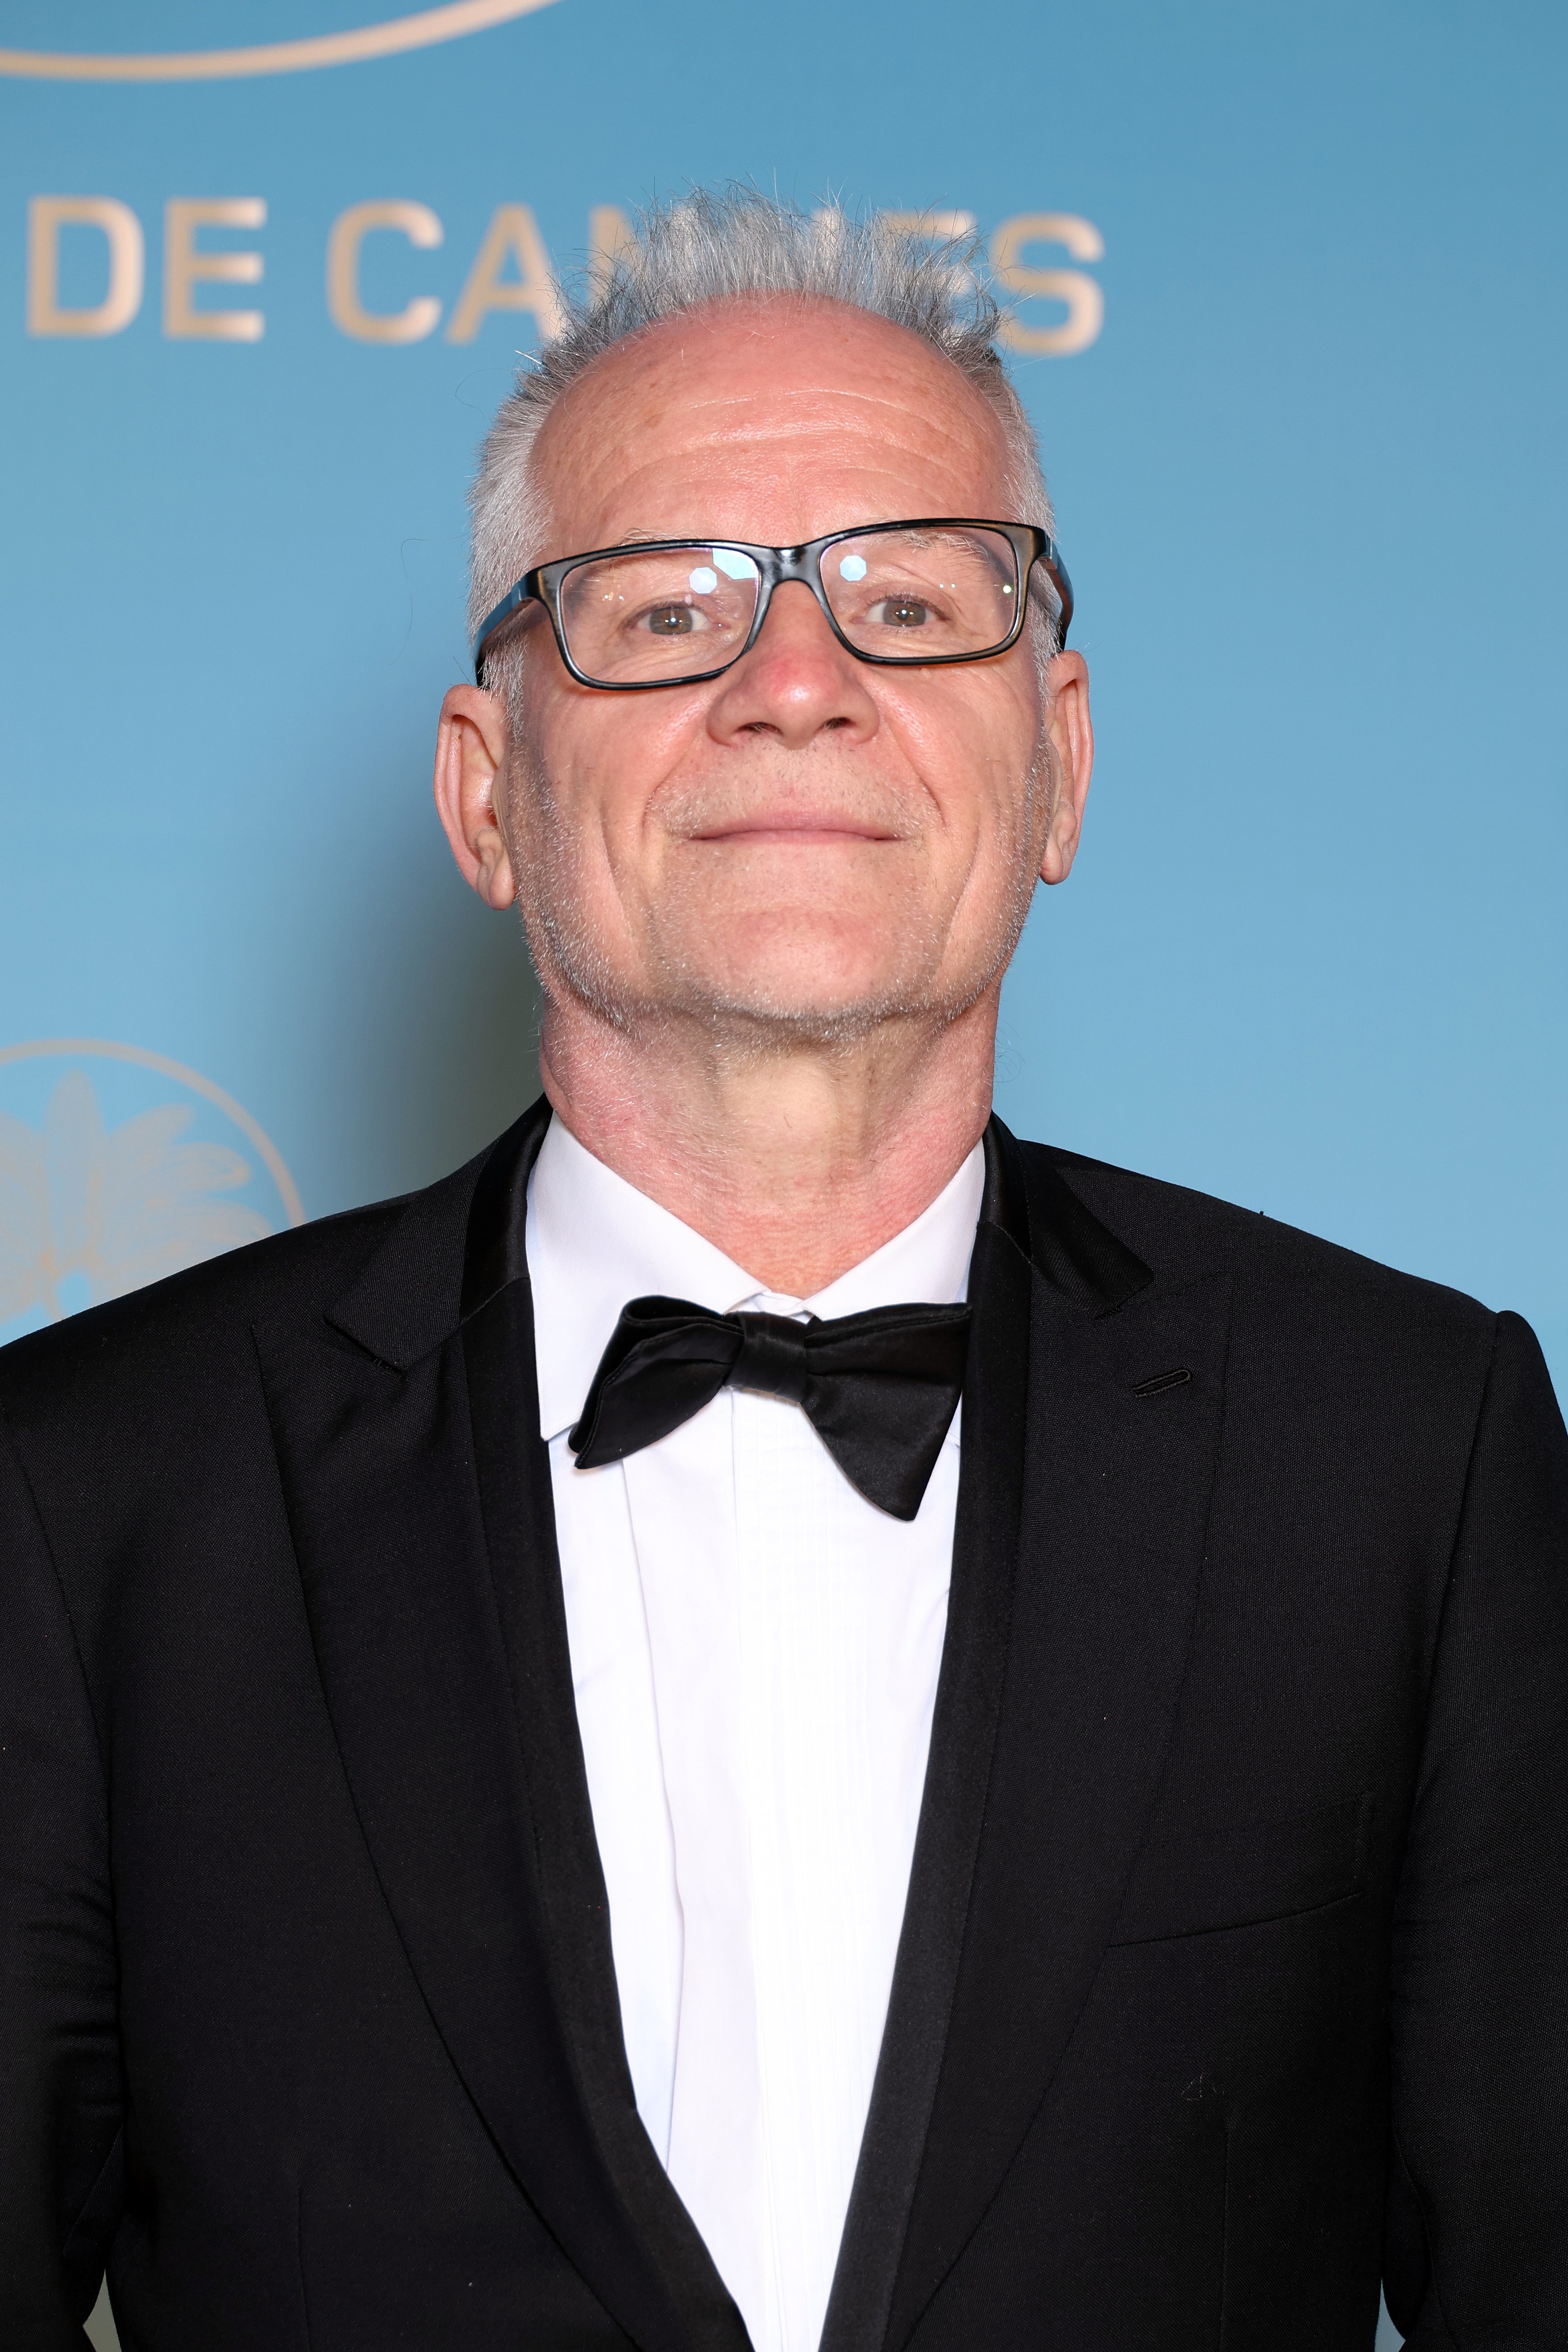 Cannes Film Festival president Thierry Fremaux attends the Opening Ceremony Official Gala Dinner